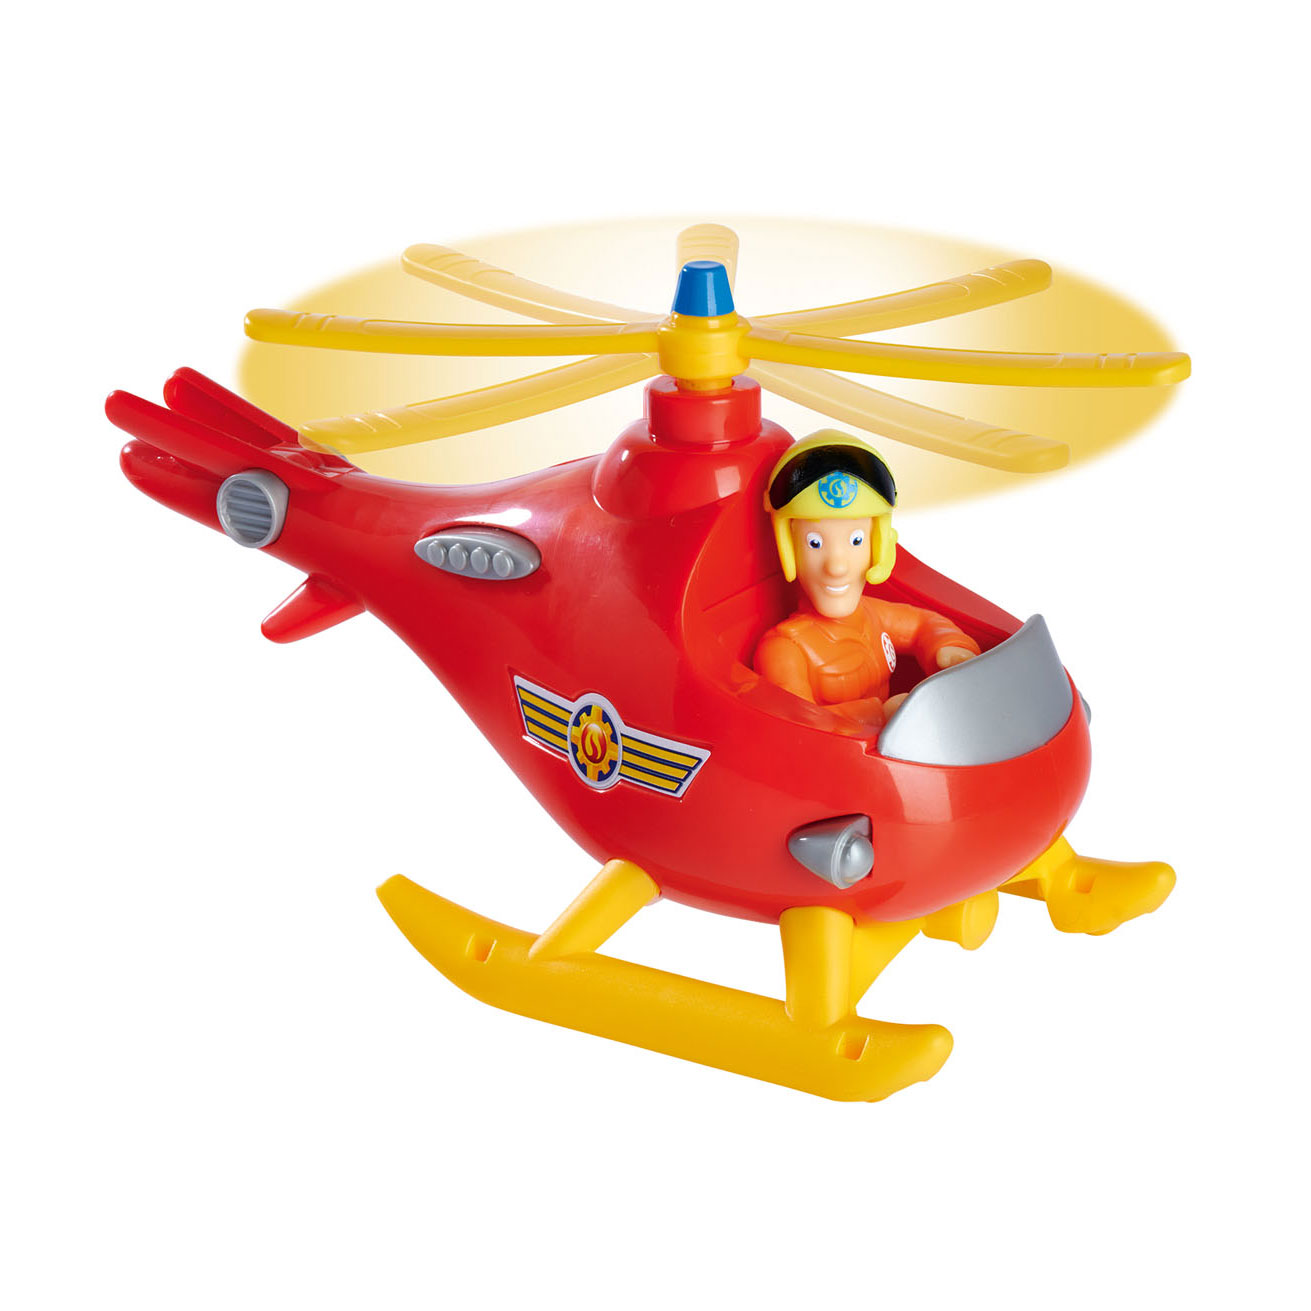 Feodaal Voel me slecht Van streek Fireman Sam Wallaby Helicopter with Tom Thomas | Thimble Toys